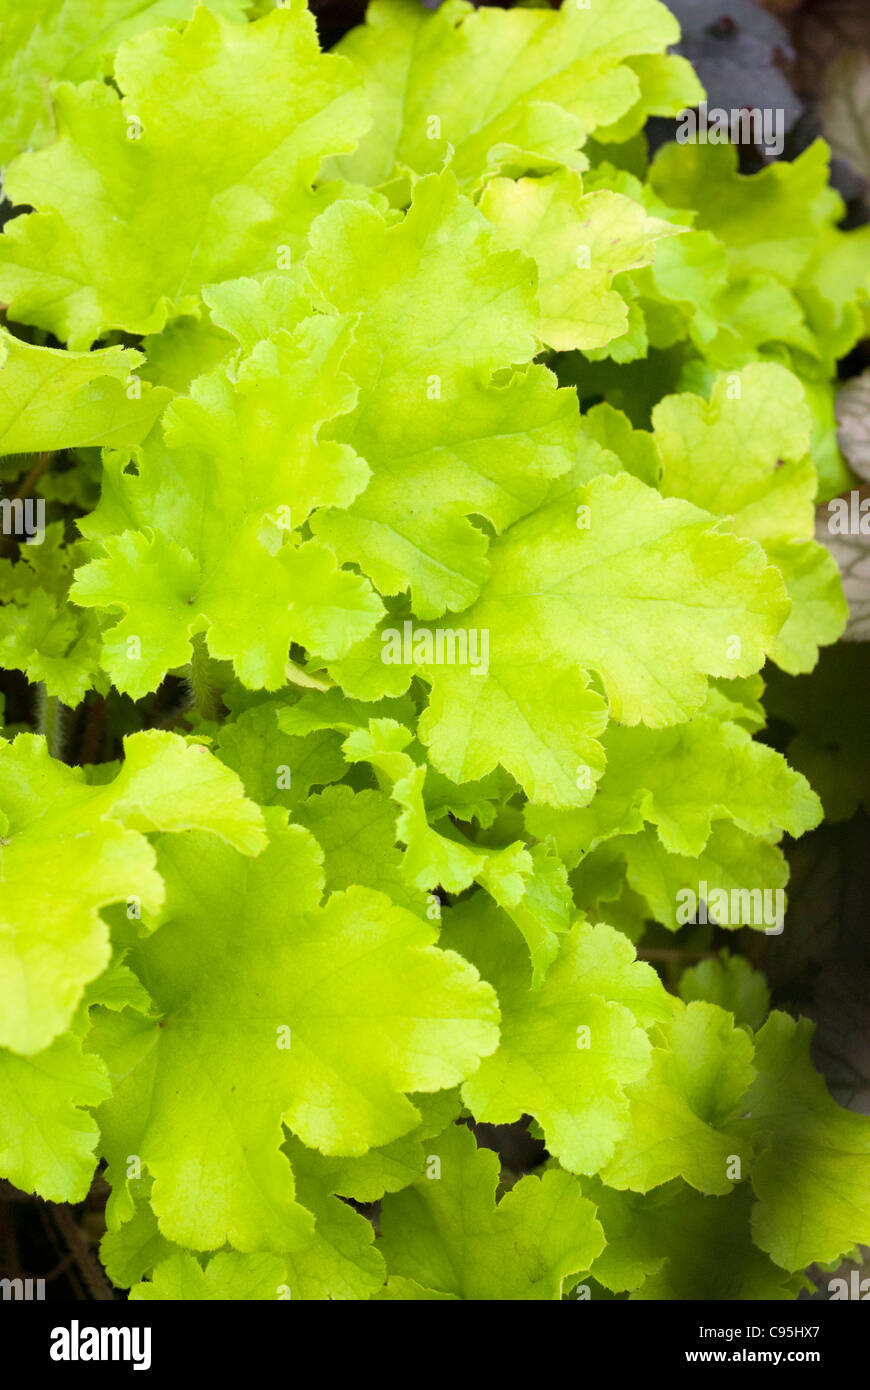 Heuchera ‘Lime Marmalade’ perennial foliage plant with green yellow gold scalloped pretty frilly leaves for shade garden Stock Photo